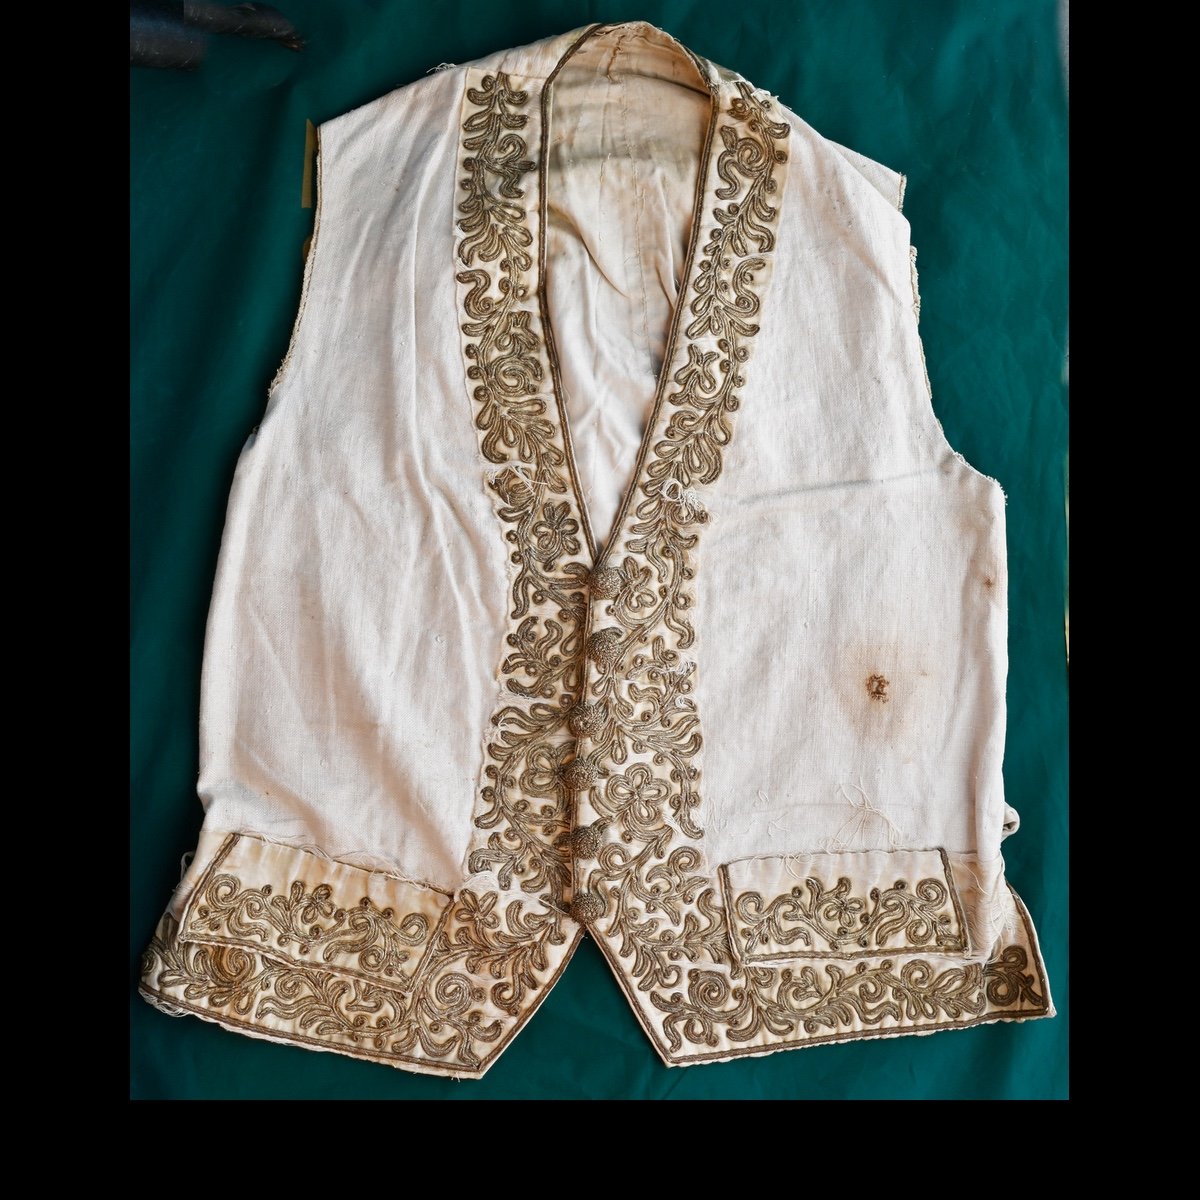 Remains of late 18th century cream shot silk waistcoat with metallic embroidery